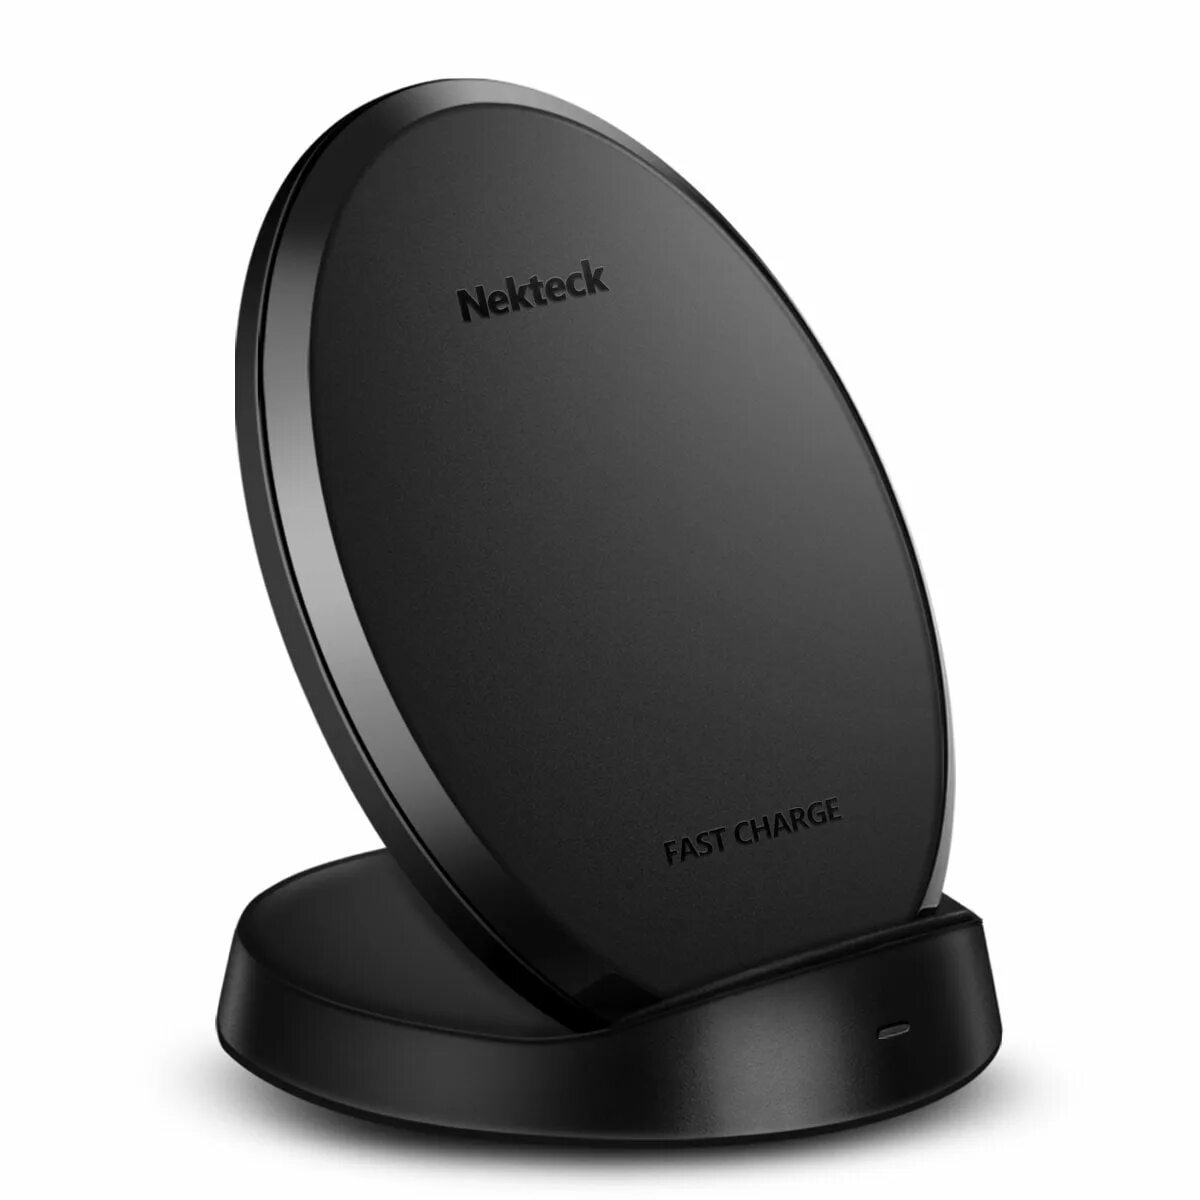 Samsung Wireless Charger Stand s9. Samsung fast charge. Wireless Charger беспроводная. Самсунг fast charge. Модели самсунг с беспроводной зарядкой